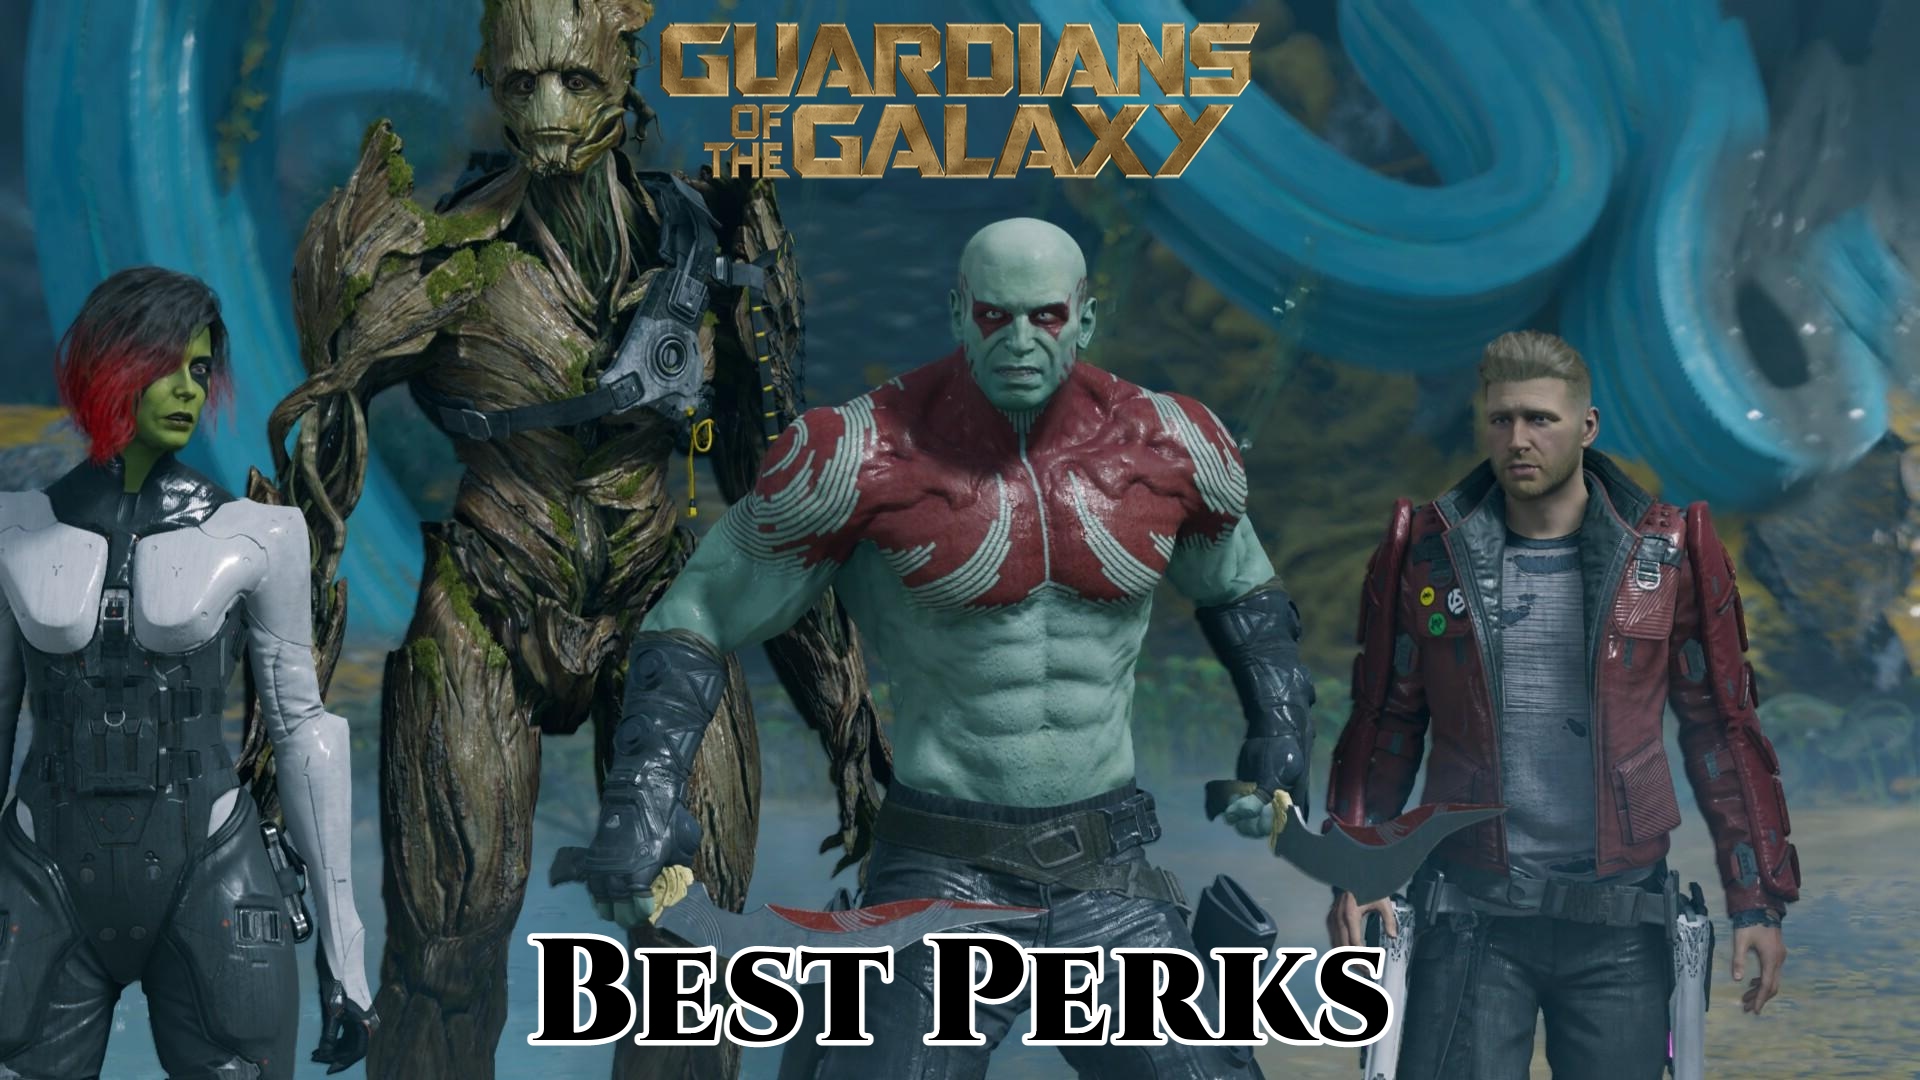 You are currently viewing Guardians of the Galaxy Best Perks